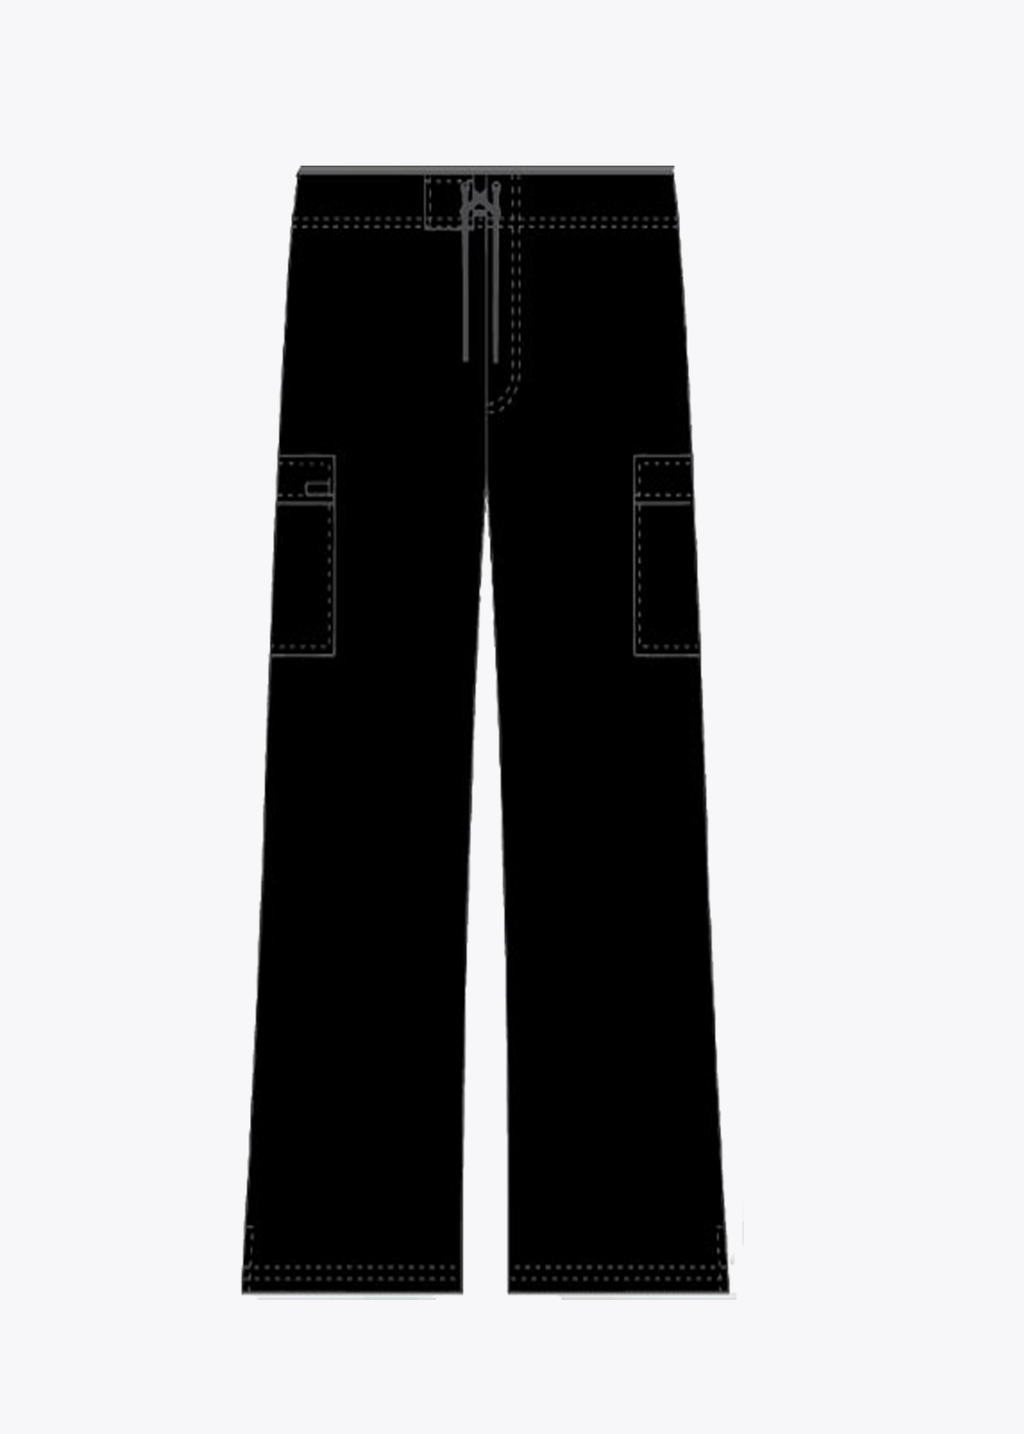 Product - MOBB Clearance Low Rise Lace Up Flare Pant - Tall